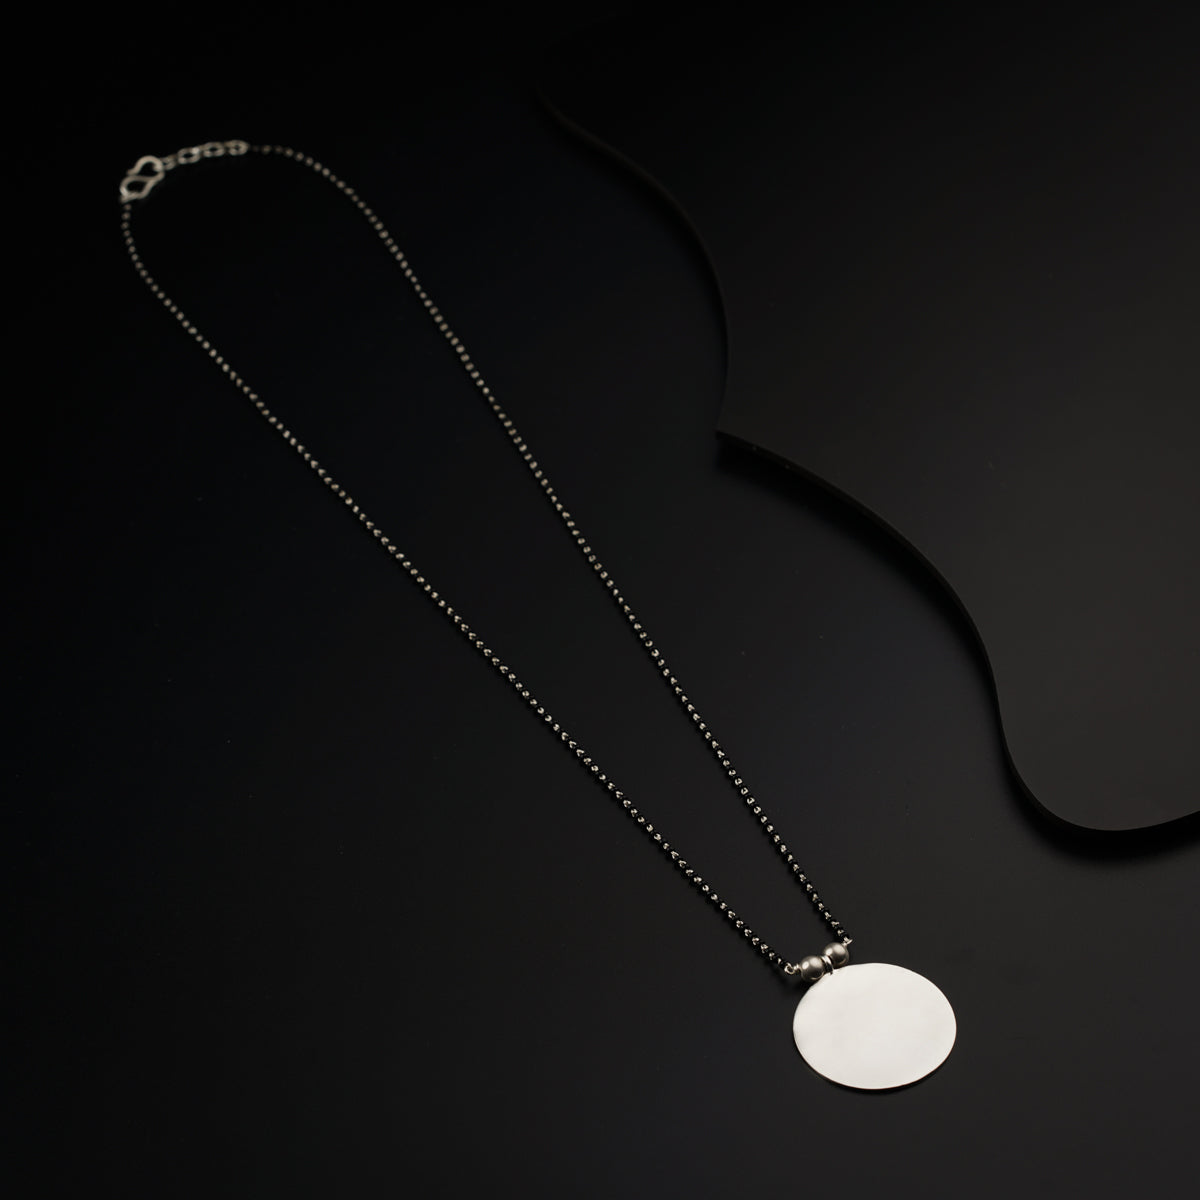 a necklace with a white disc on a black background